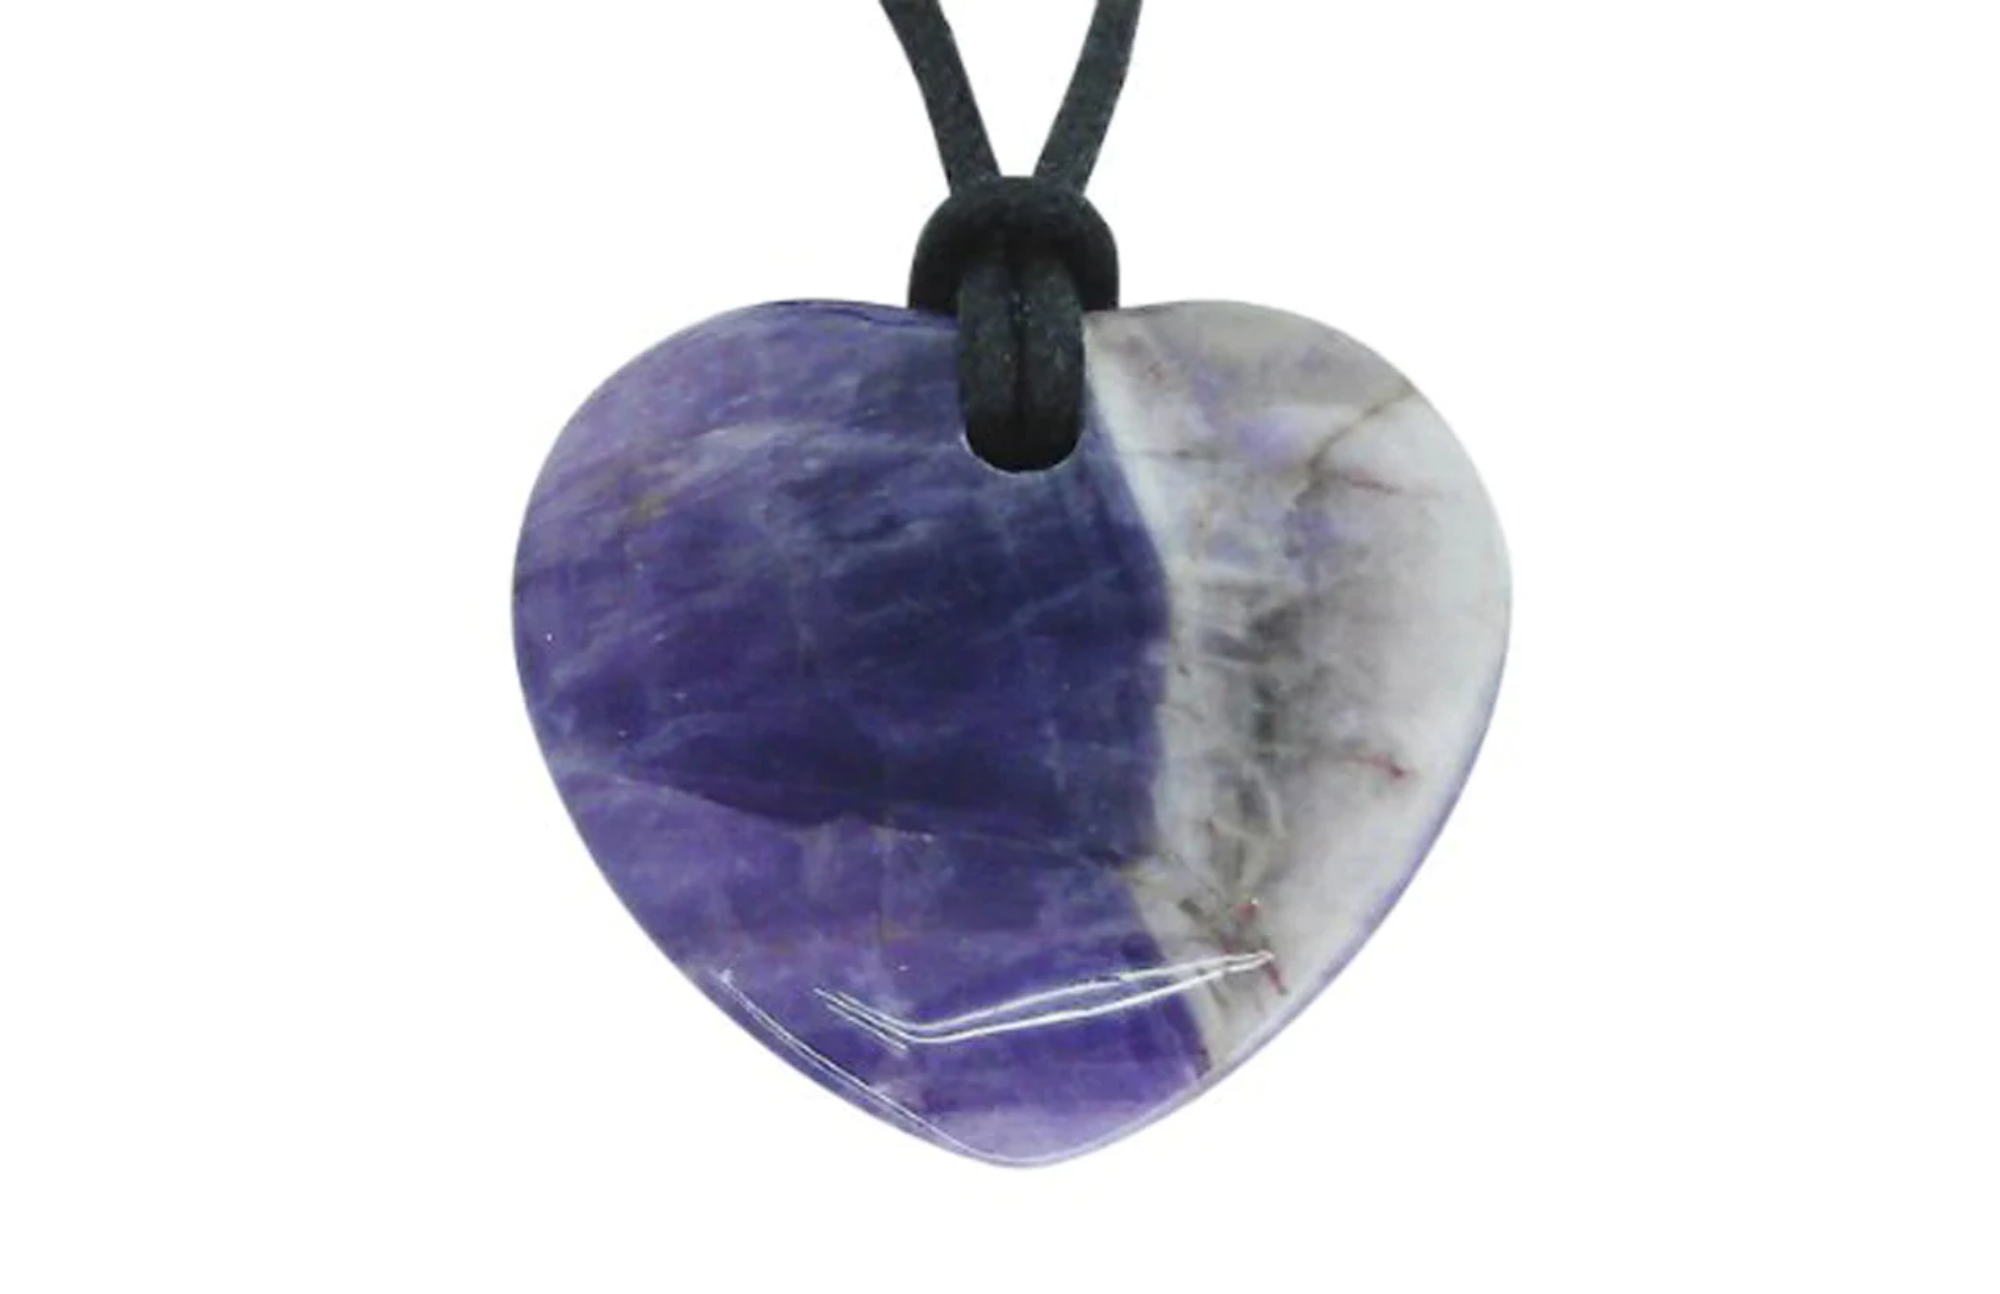 Amethyst heart with thick black lace attached to it